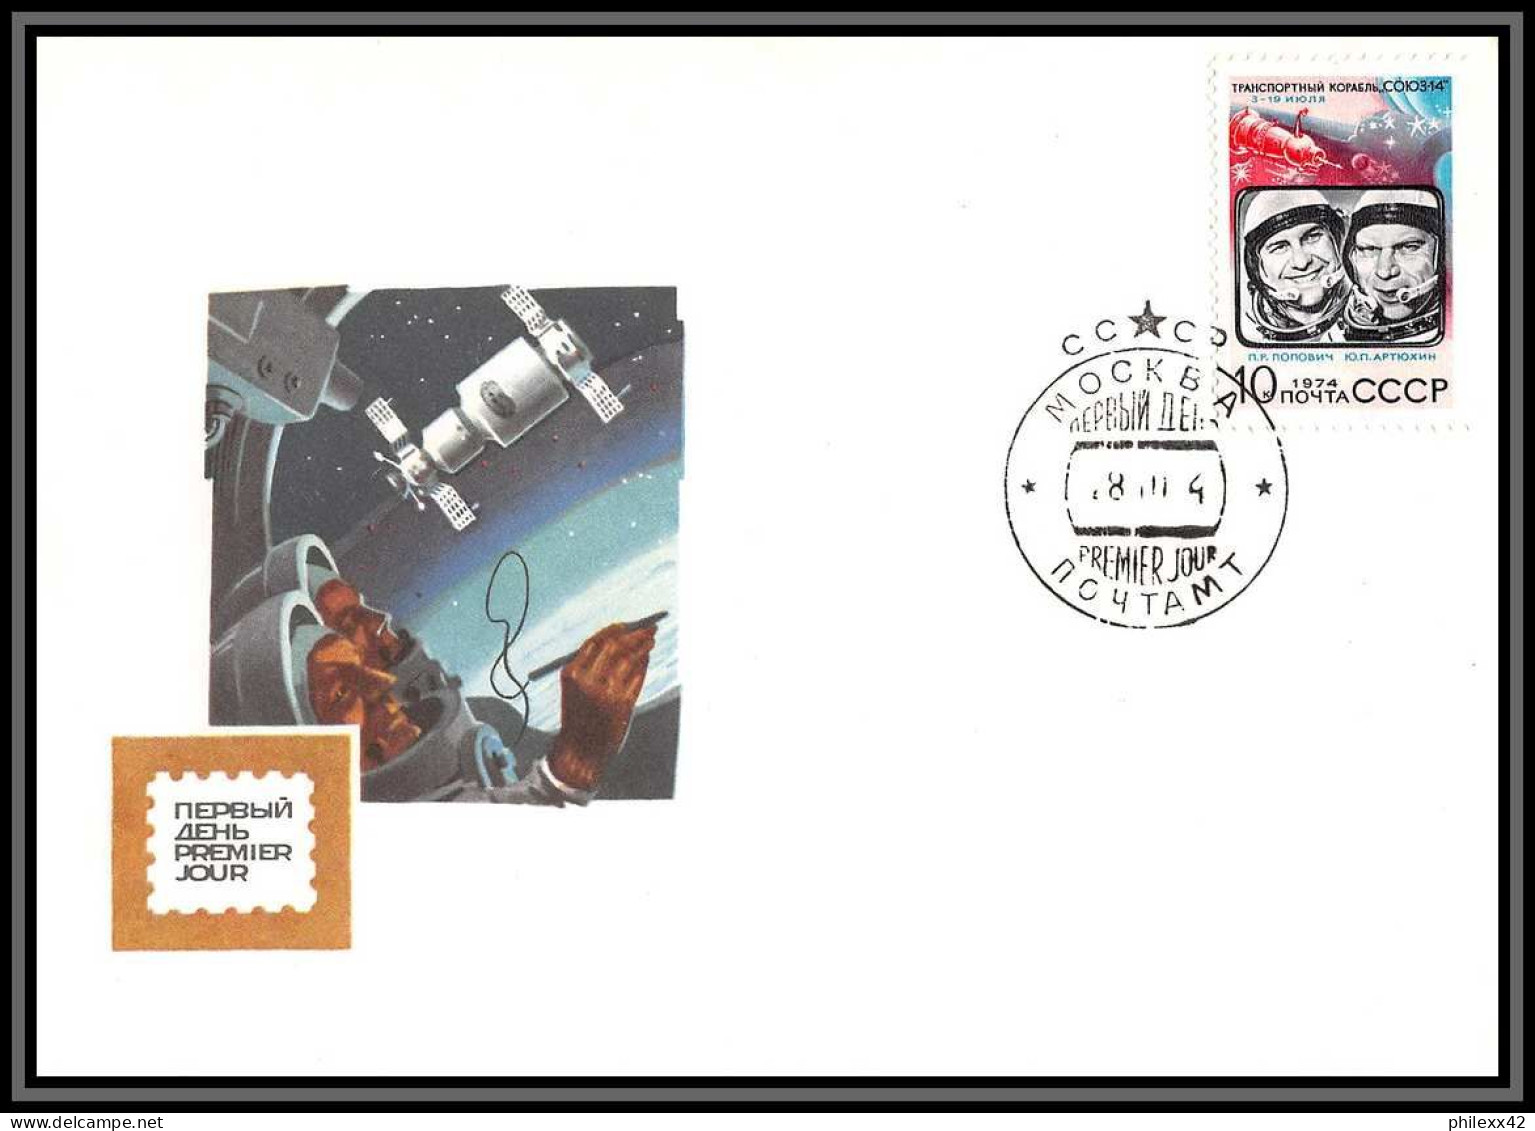 3380 Espace (space Raumfahrt) Lettre (cover) Russie (Russia Urss USSR) Fdc 4091 + Mnh O Soyuz (soyouz Sojus) 14 1974 - Rusia & URSS